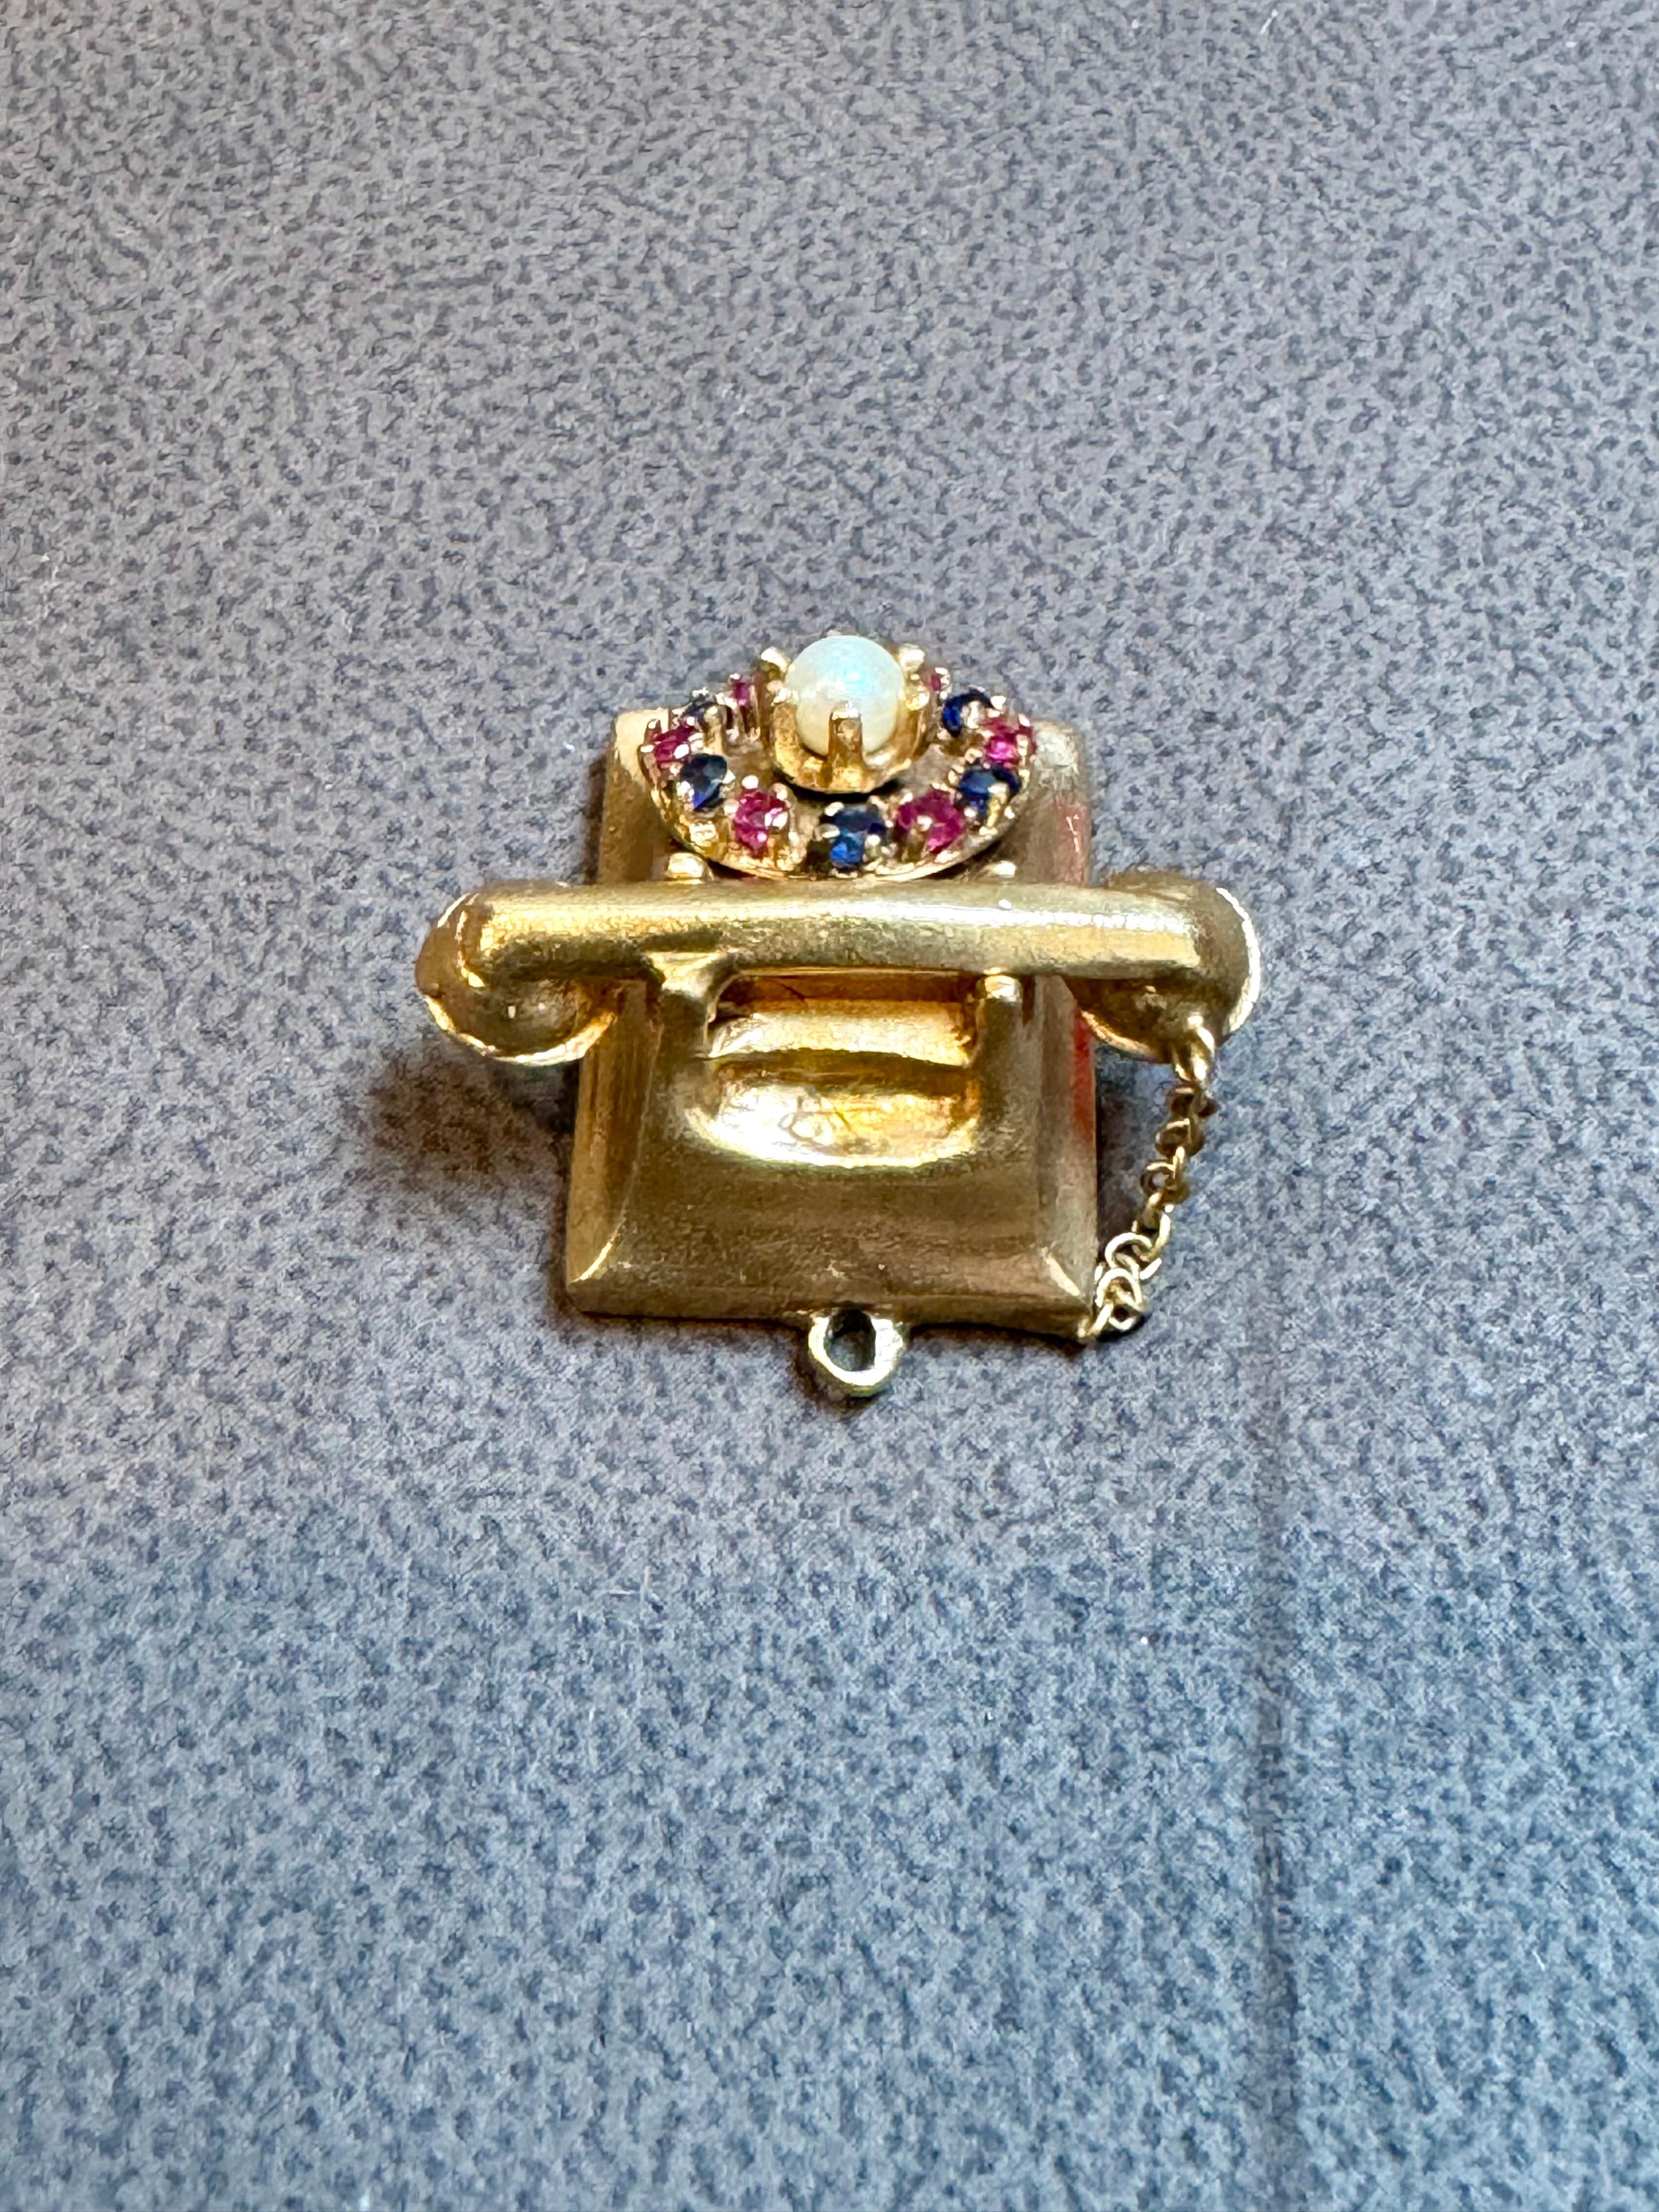 Miniature Vintage 1950s 14Kt Yellow Gold Retro Telephone Ruby , Sapphire & Pearl 5